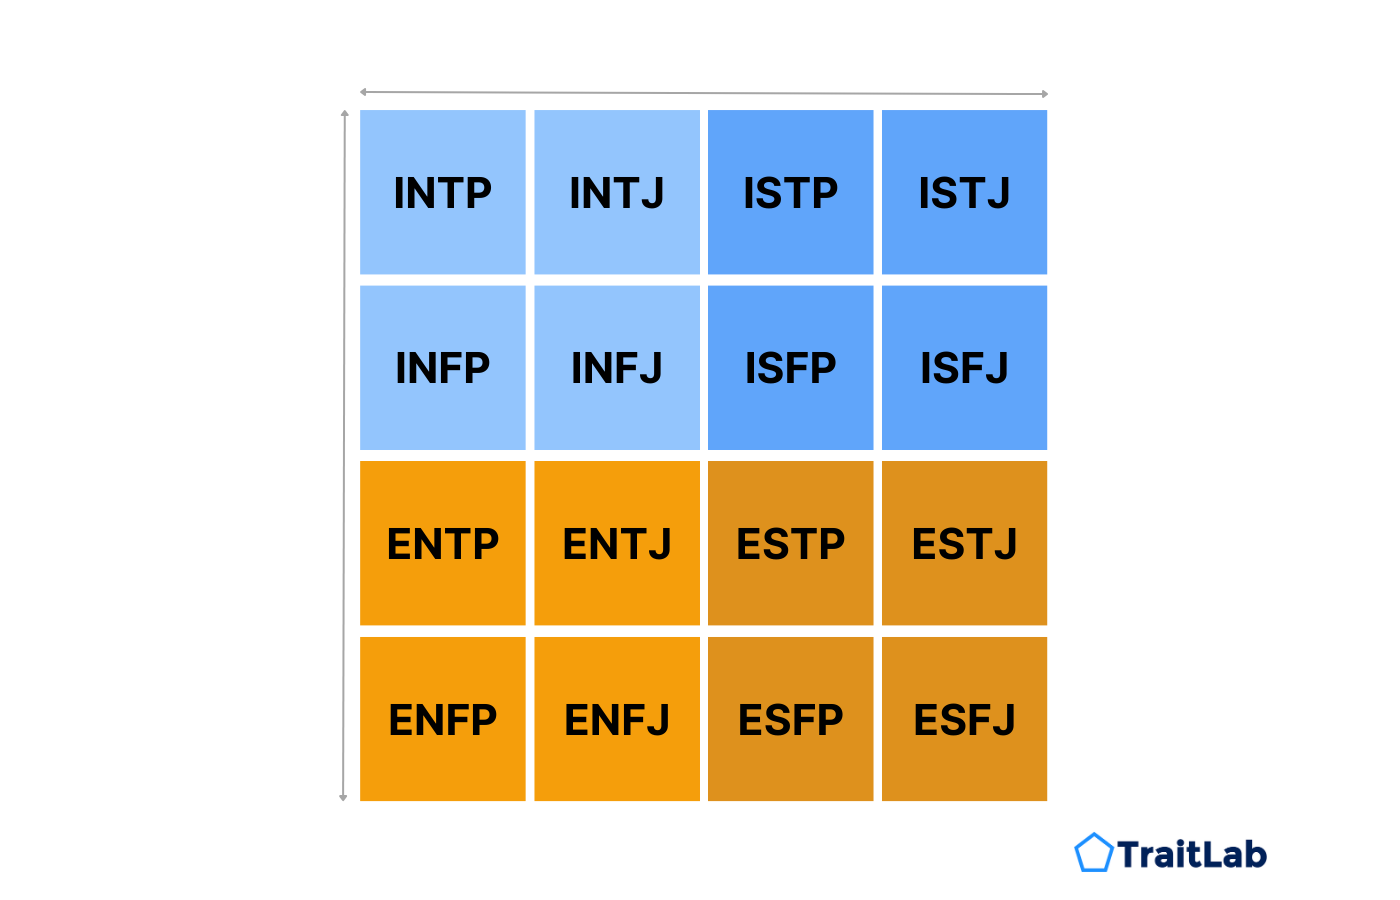 An chart showing the 16 personality types framework, including INFJ (Introverted, Intuiting, Feeling, Judging) and ESTP (Extraverted, Sensing, Thinking, Perceiving).